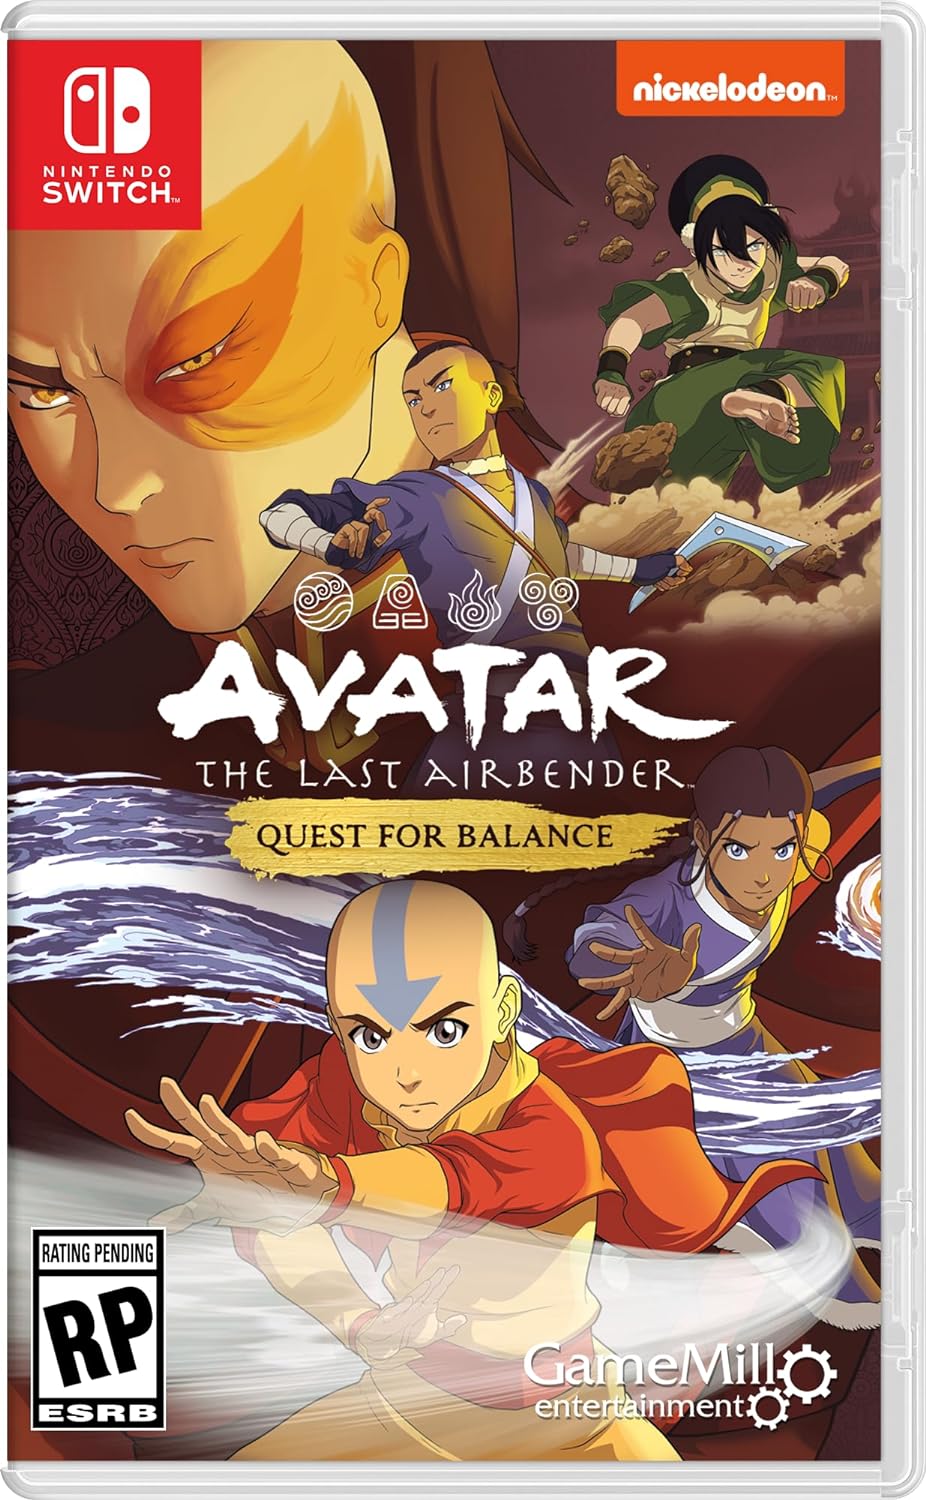 Avatar The Last Airbender: The Quest for Balance (Nintendo Switch) $20 + Free Shipping w/ Prime or on orders over $35